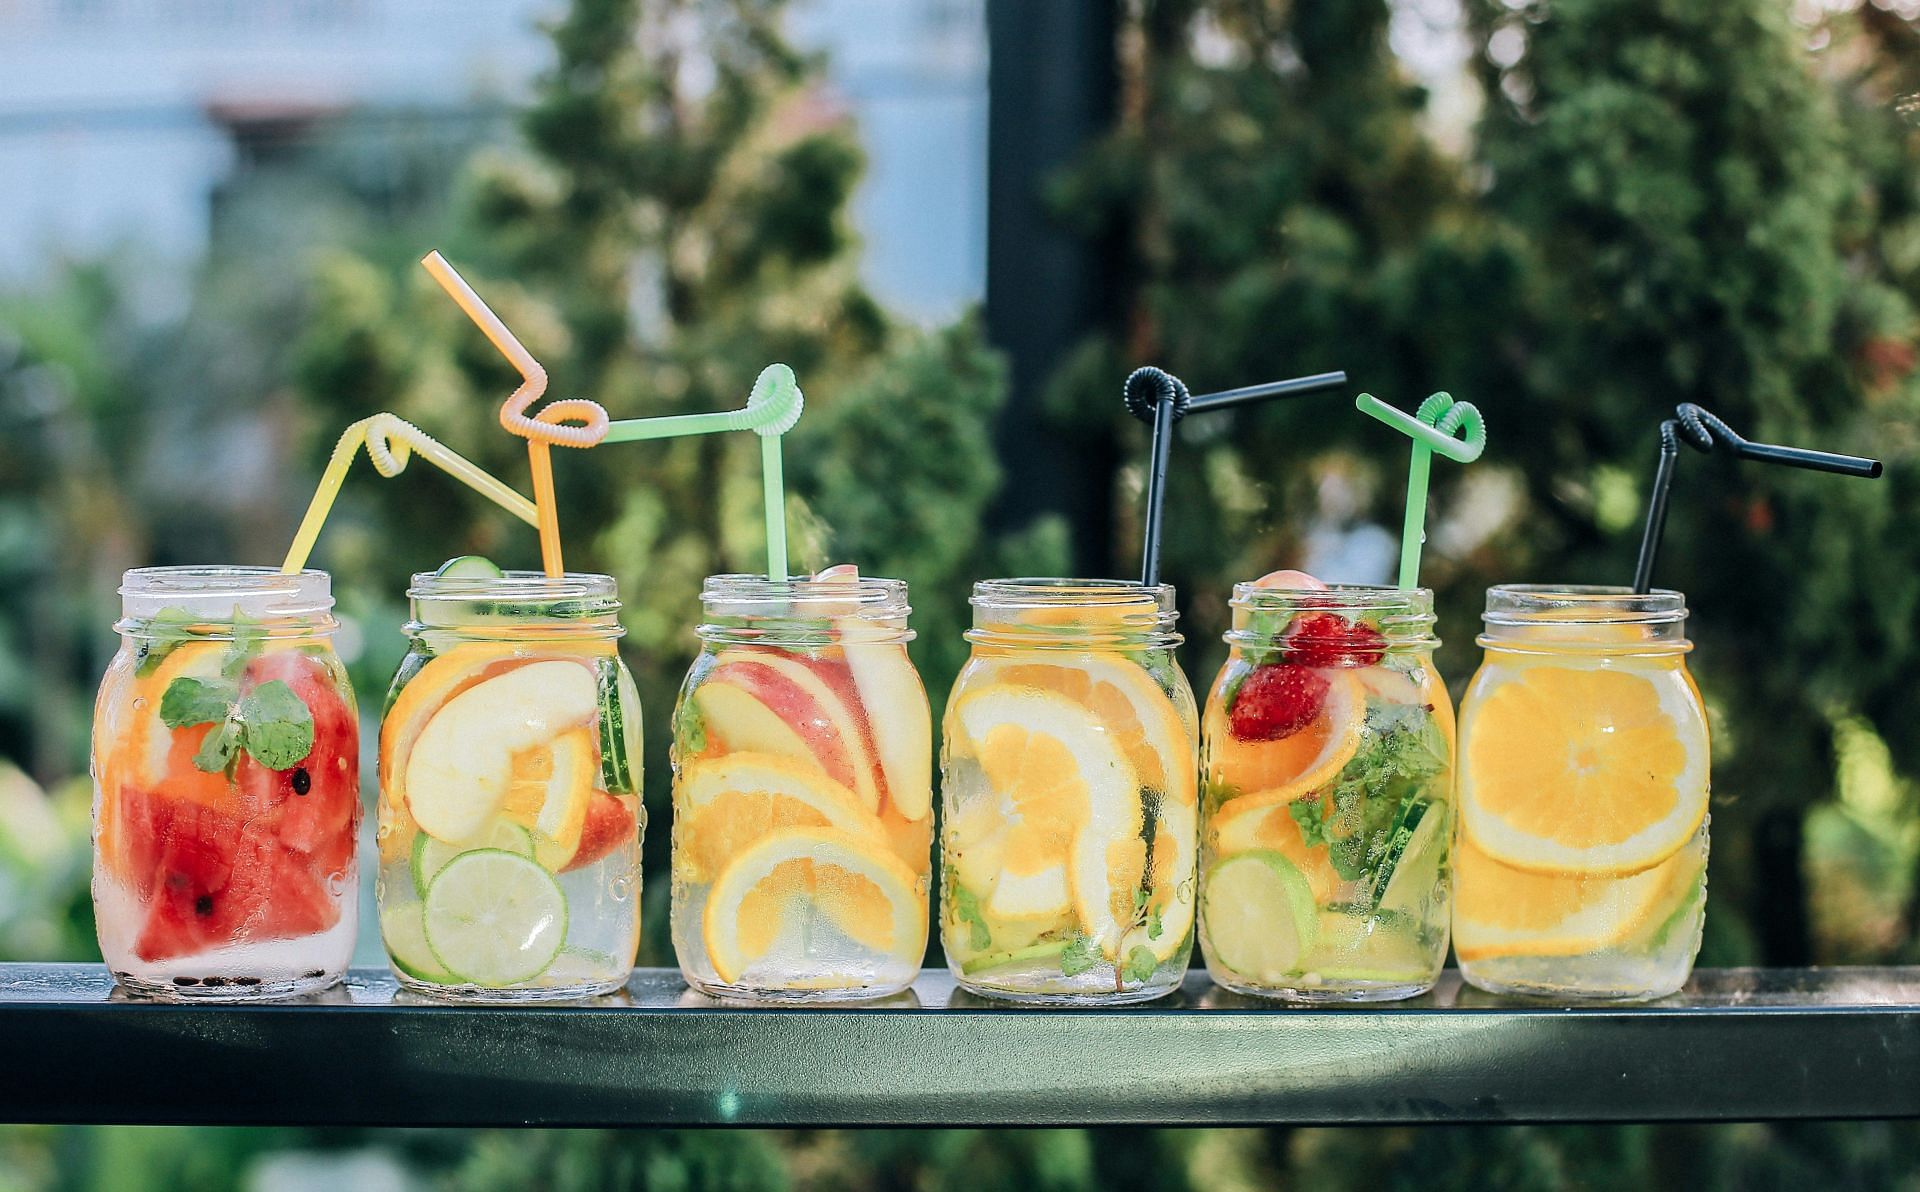 Drinking healthy and eating healthy is the key (Image by Kaizen Nguyen/Unsplash)